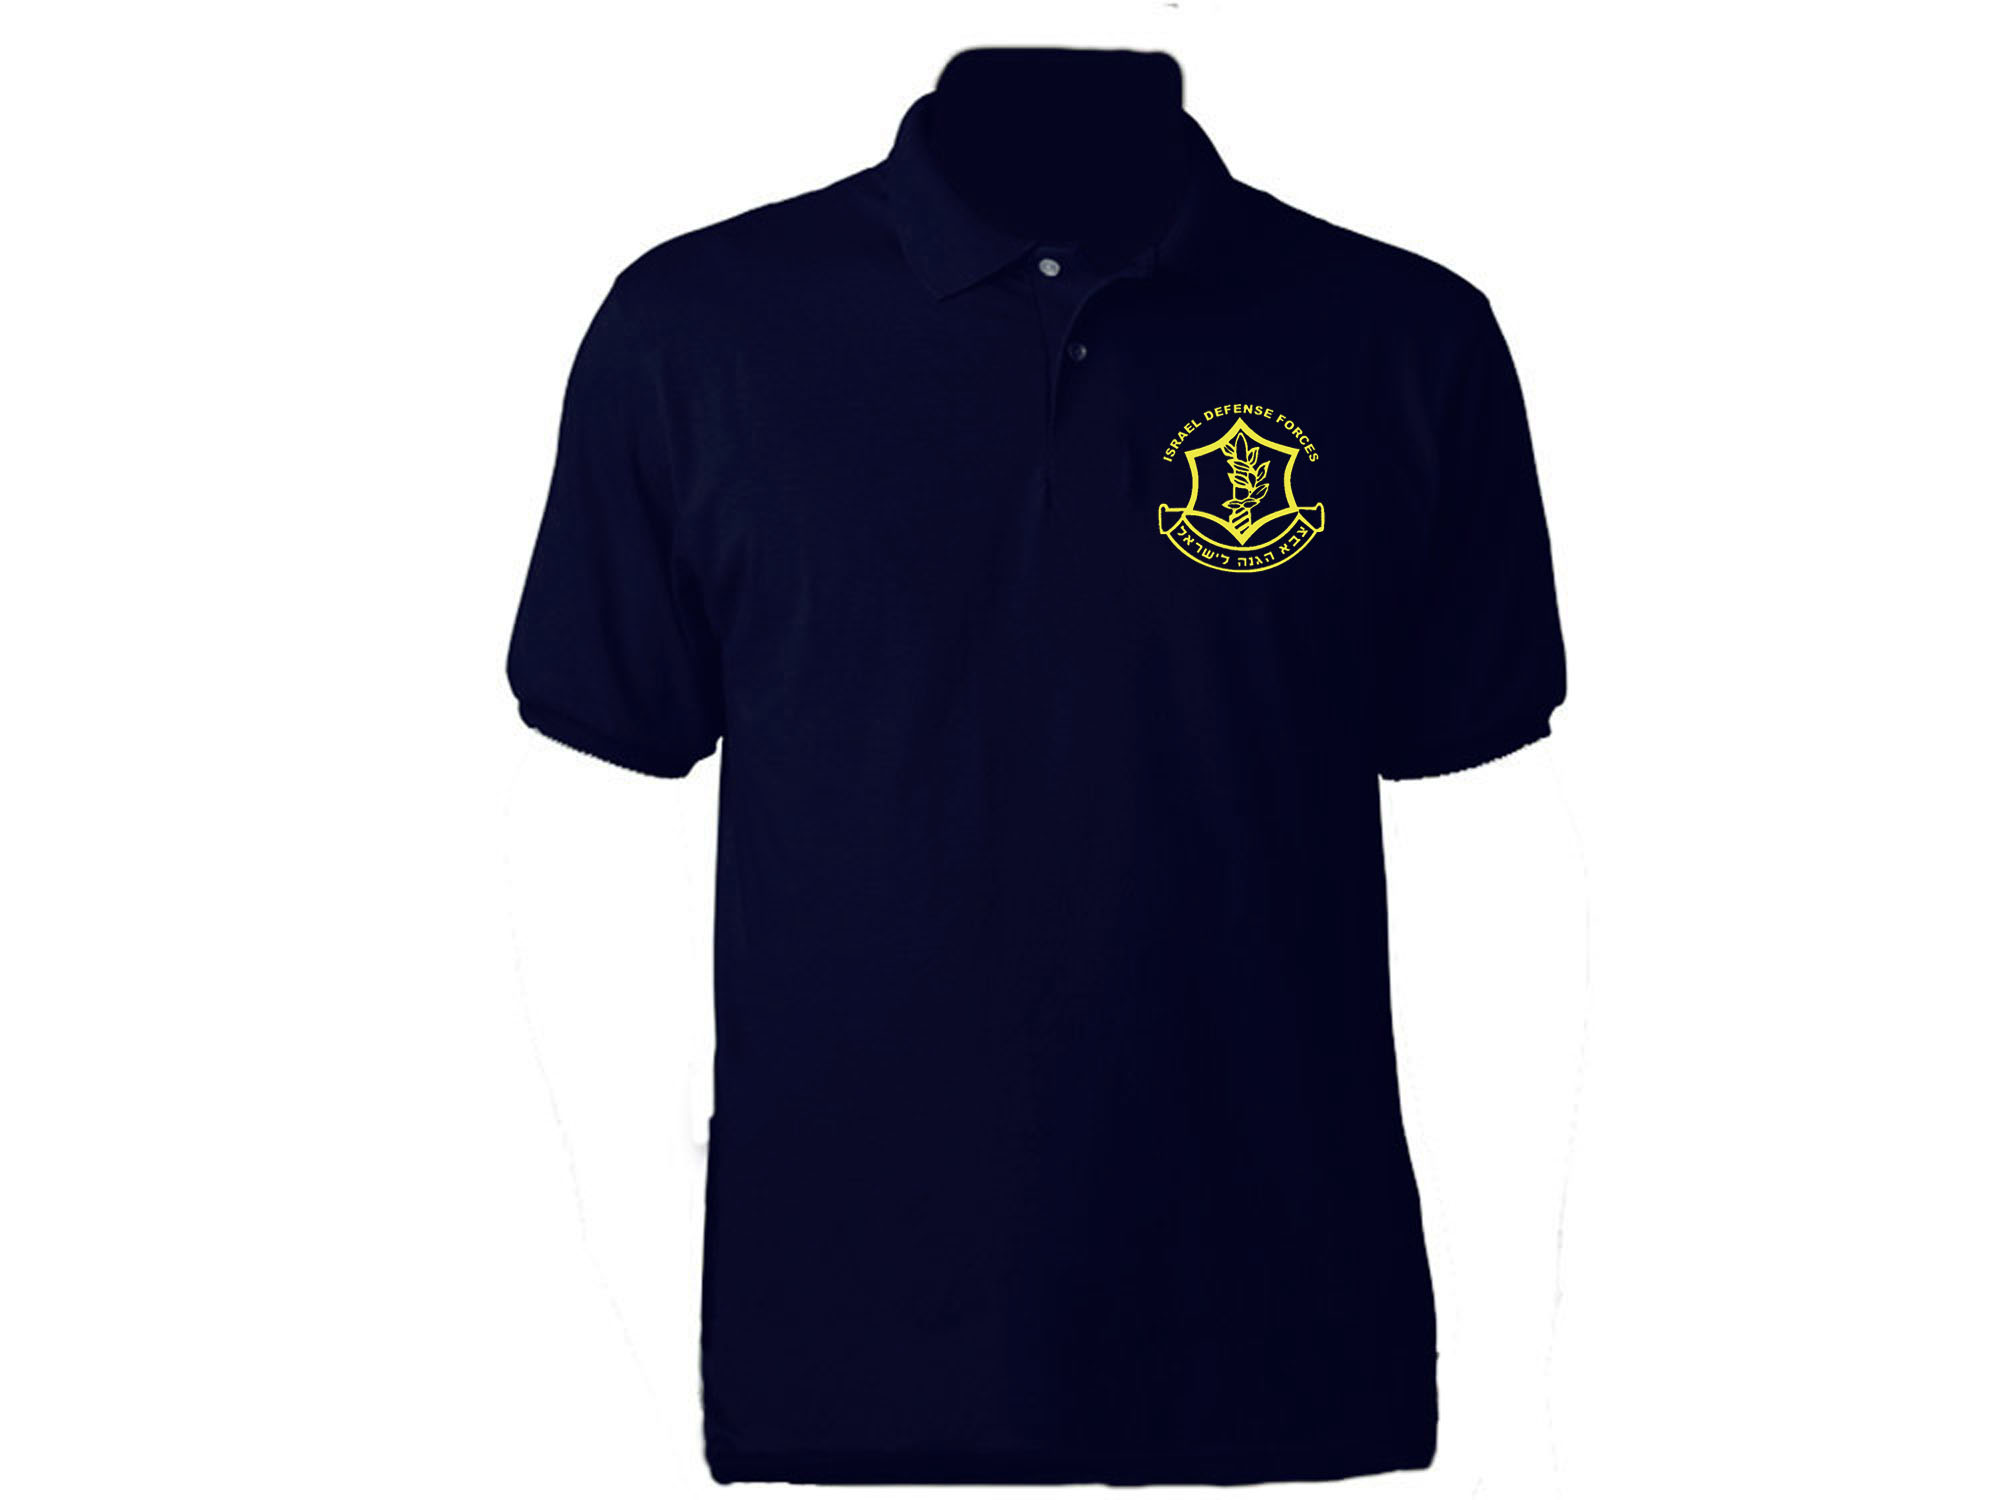 Israel army emblem navy blue sweat proof polo style t-shirt